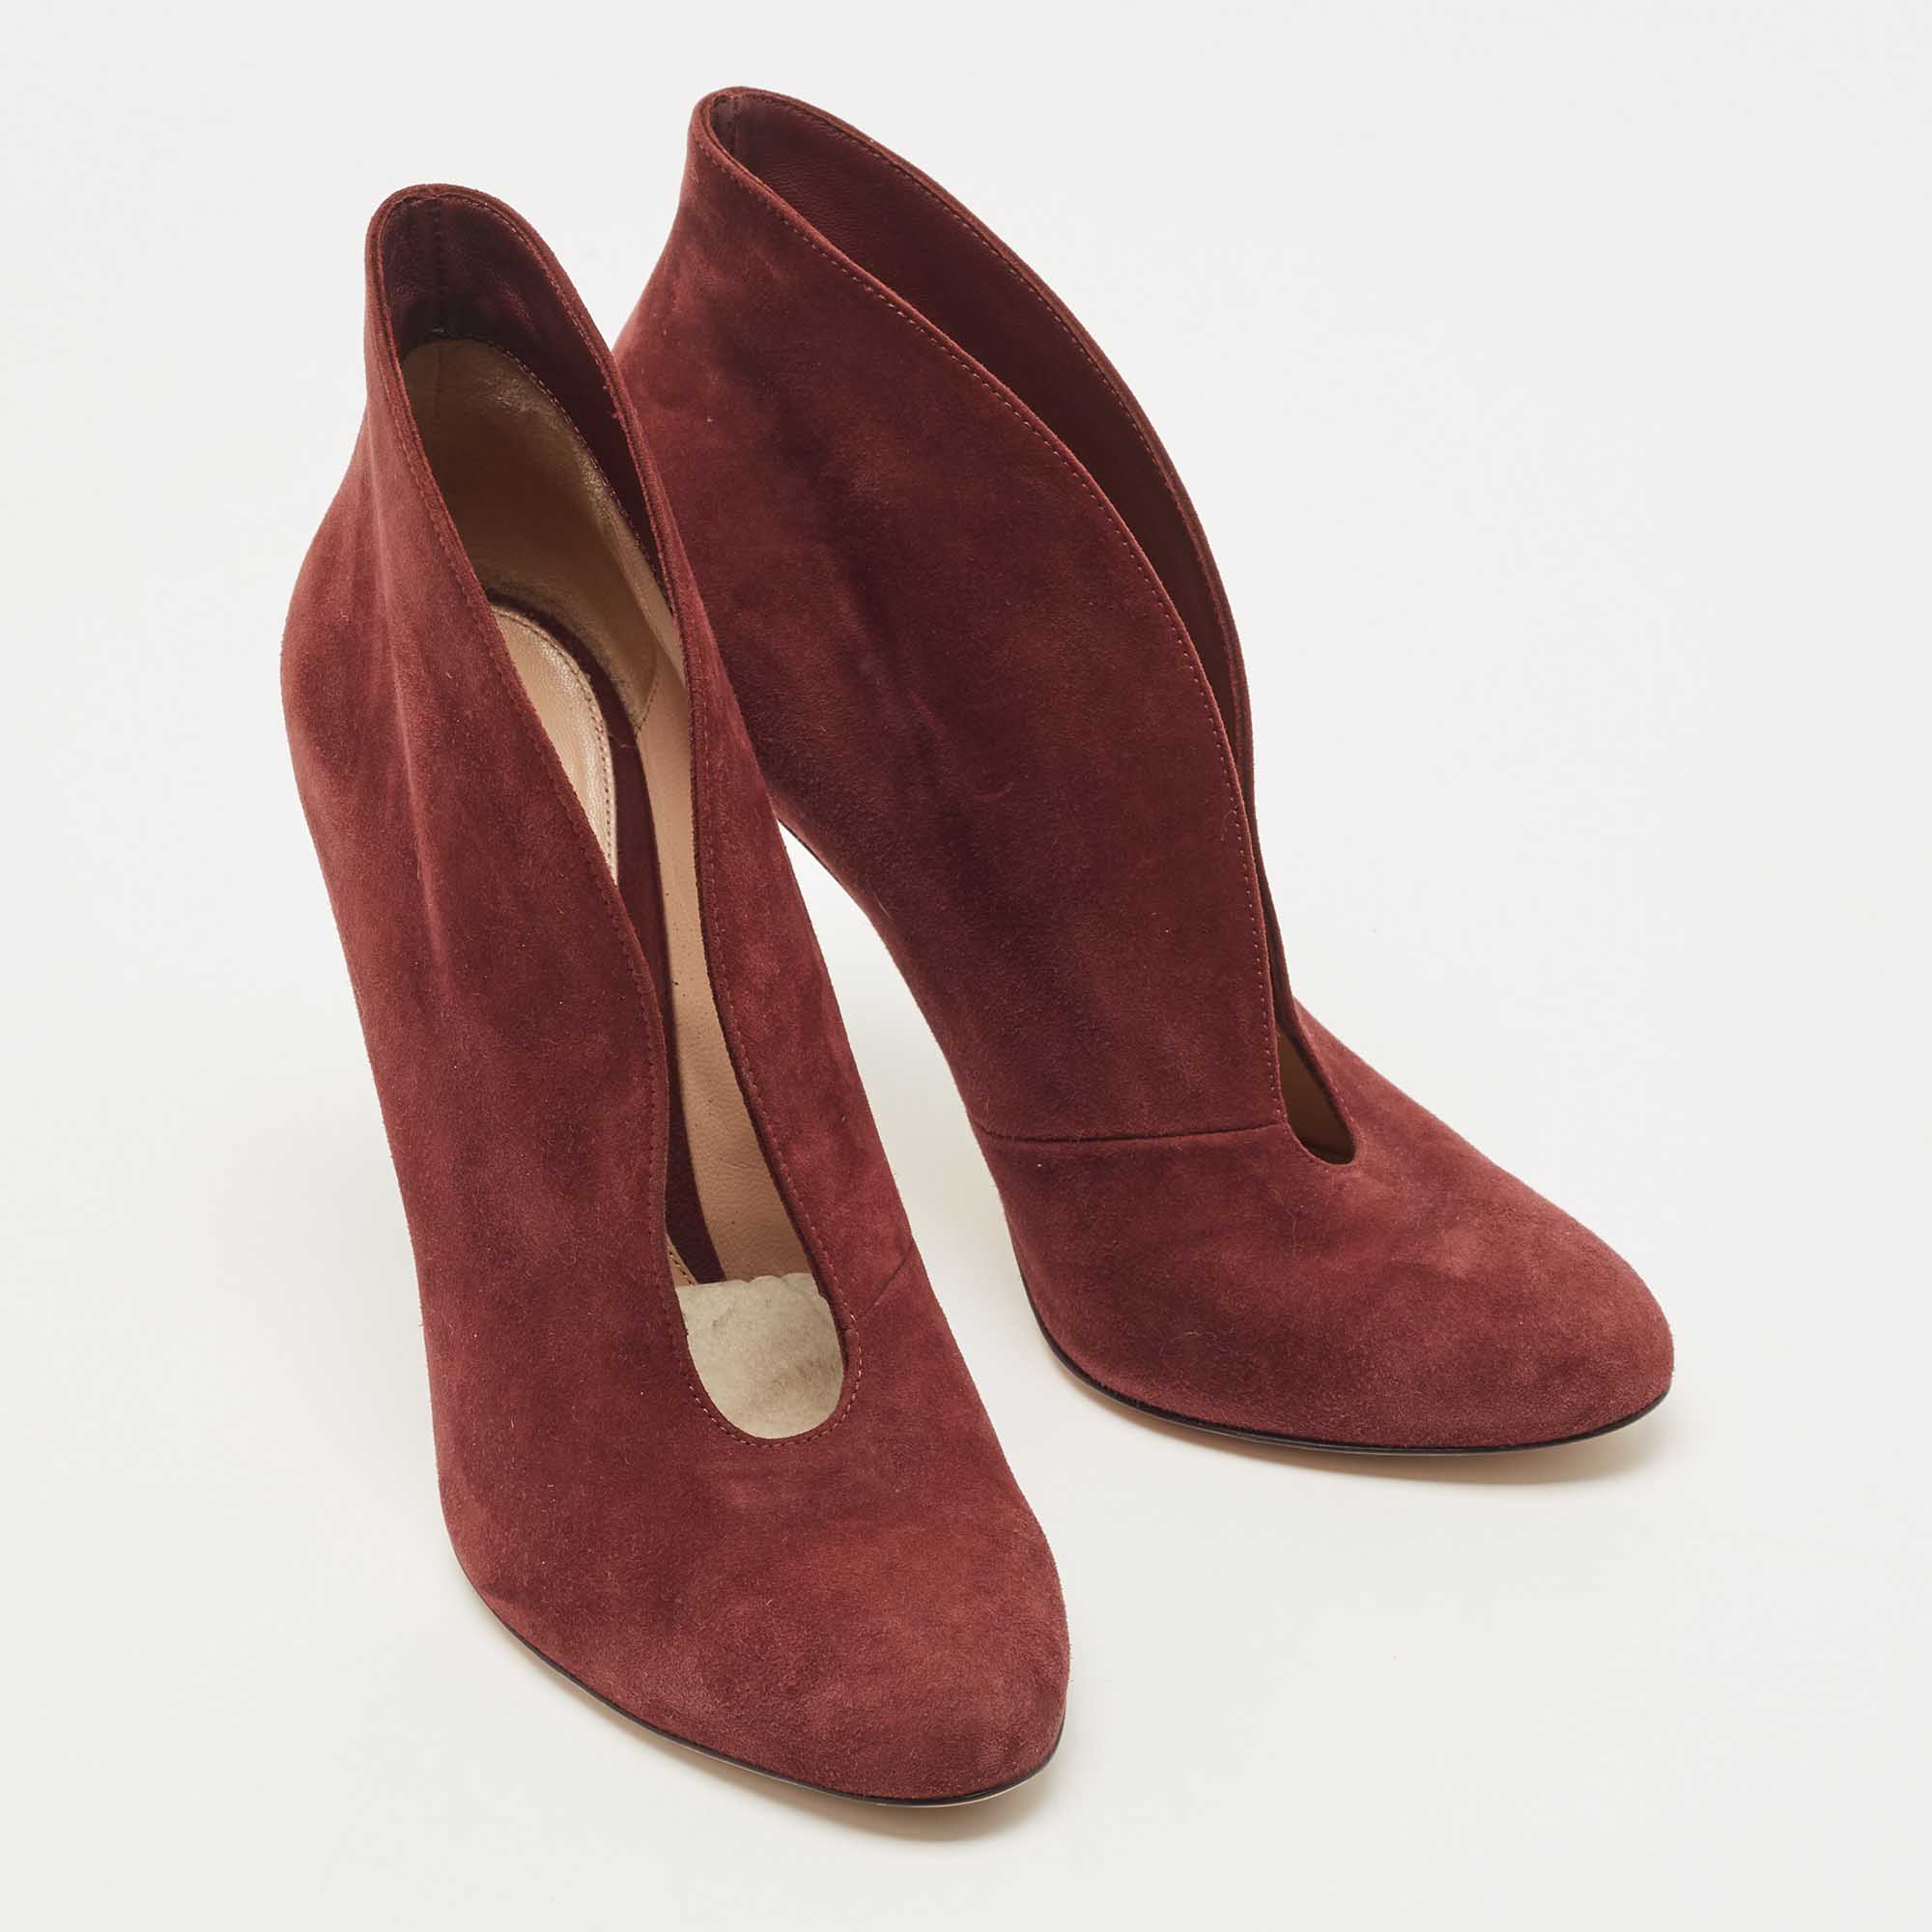 Gianvito Rossi Burgundy Suede Vamp Ankle Length Boots Size 38.5